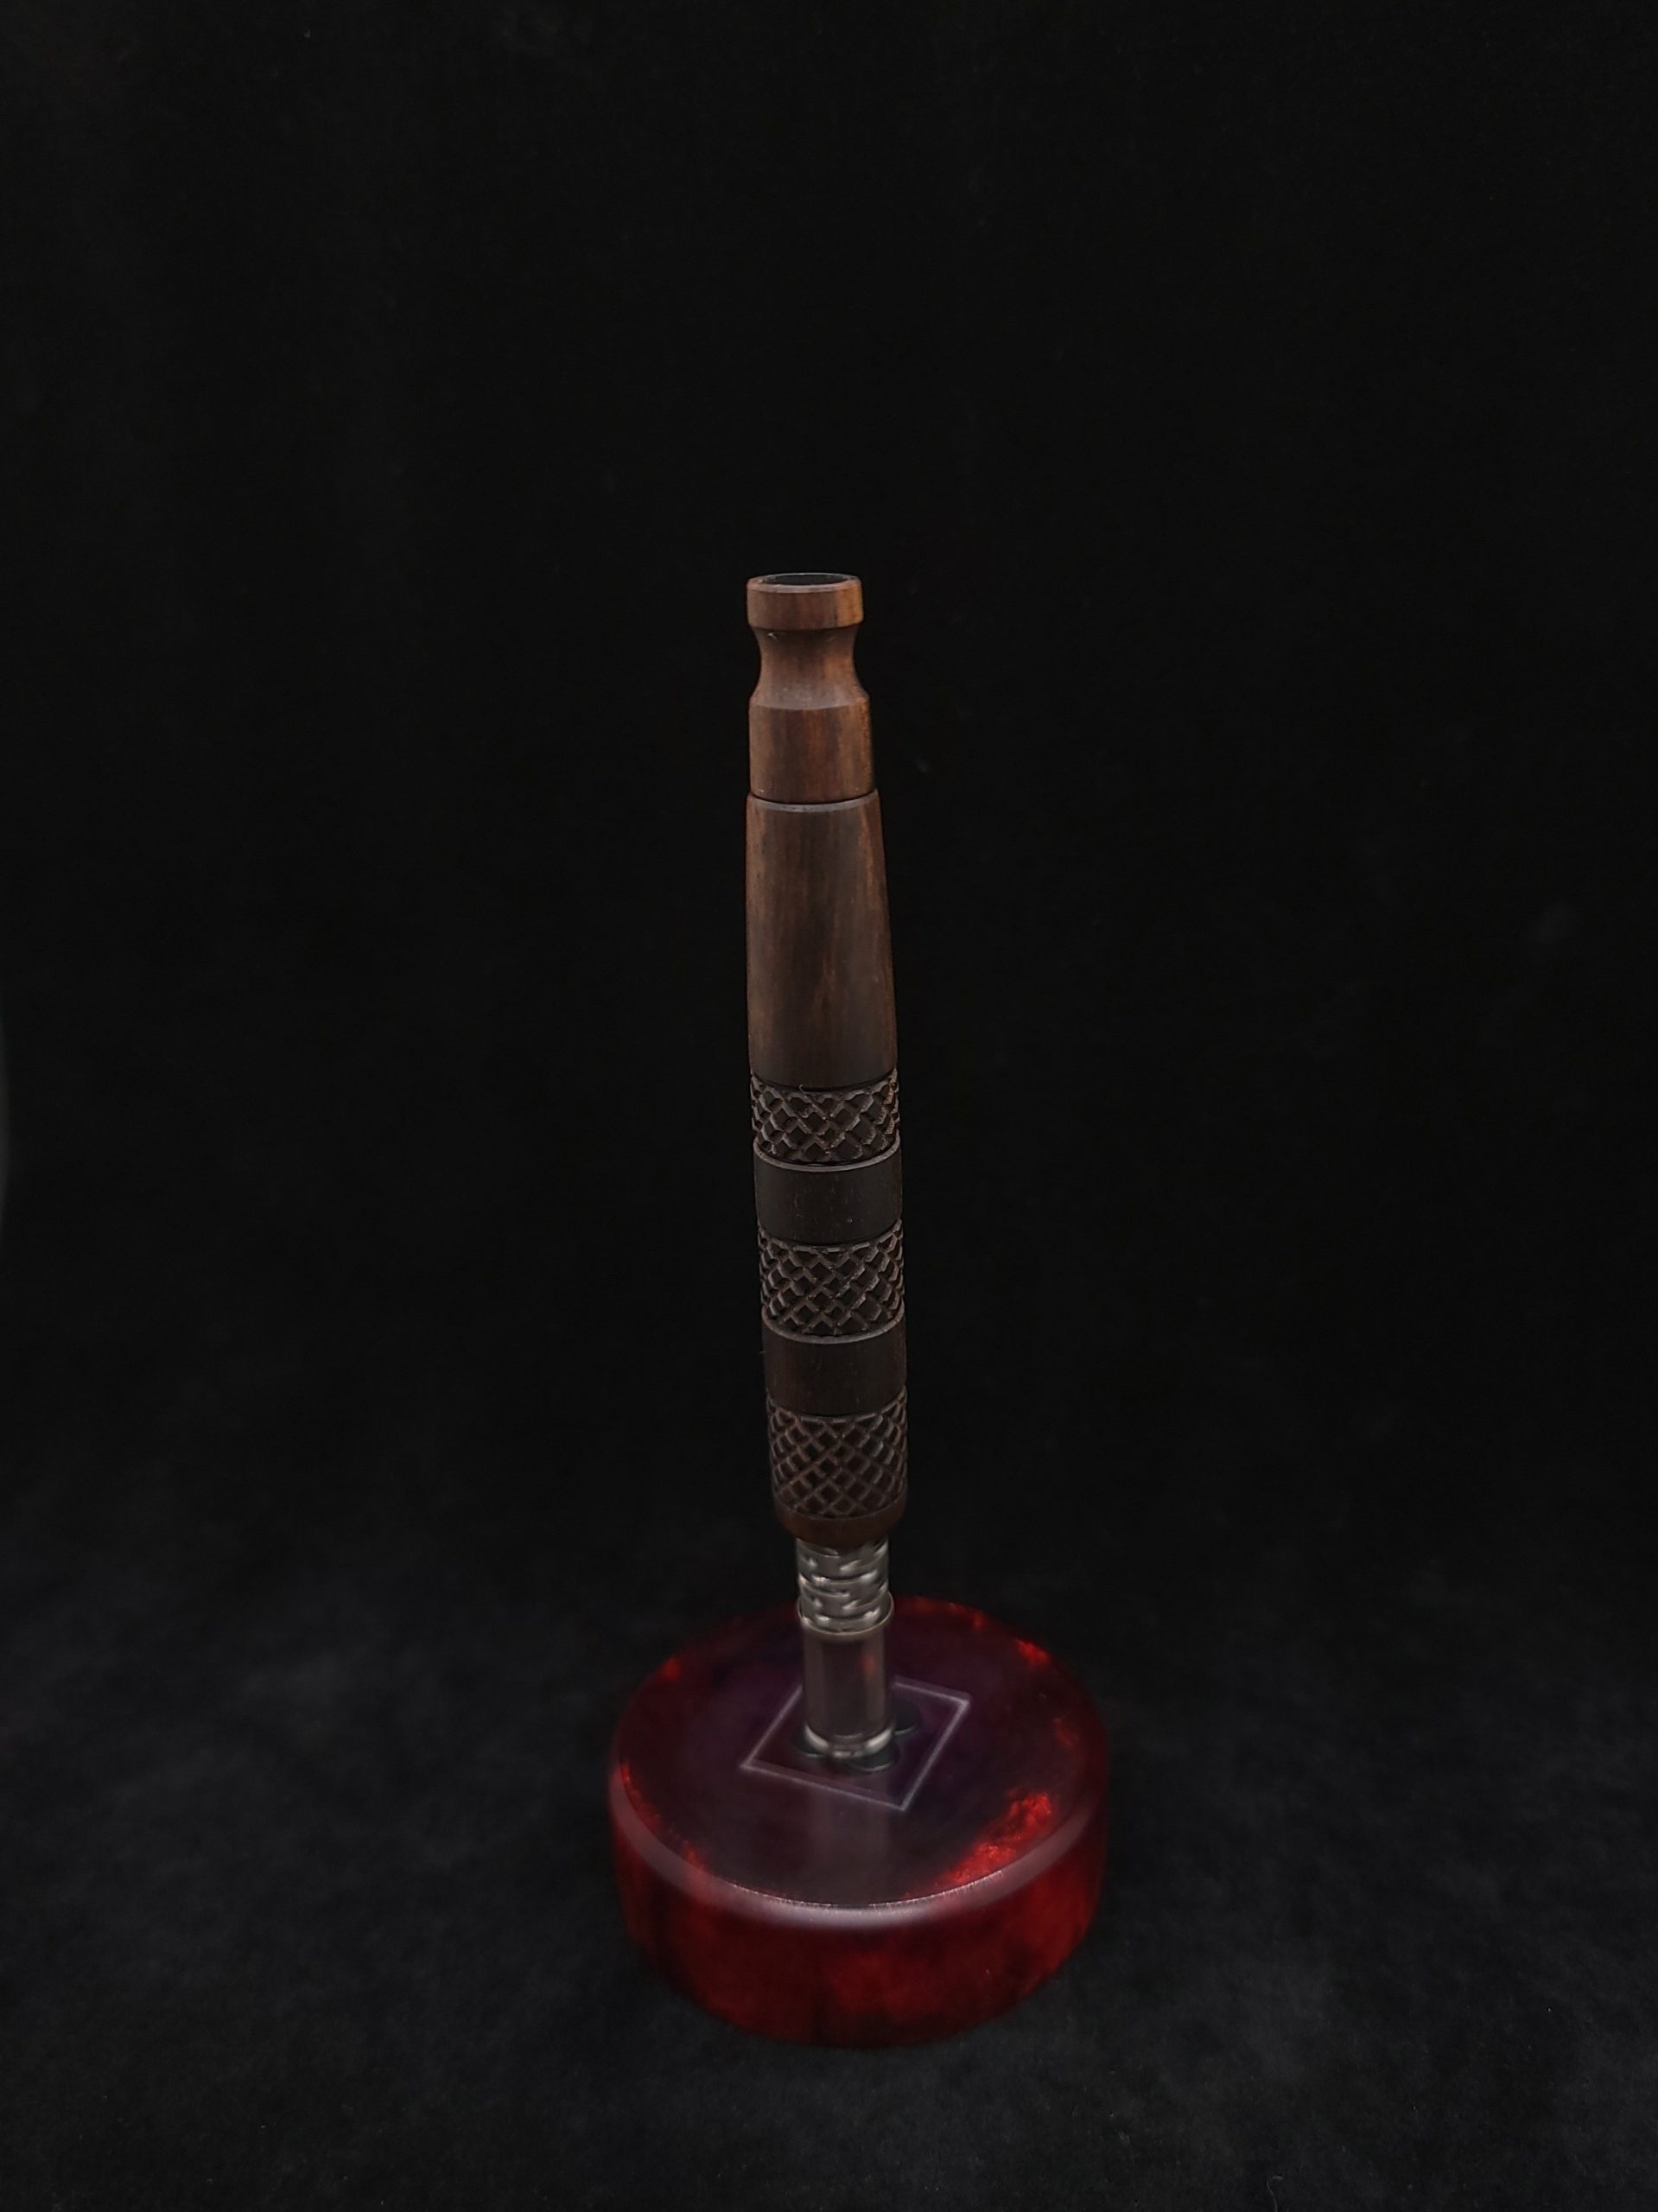 This image portrays High Class-Knurled XL Dynavap Stem/2-Tone Ebony with Matching Mouthpiece by Dovetail Woodwork.